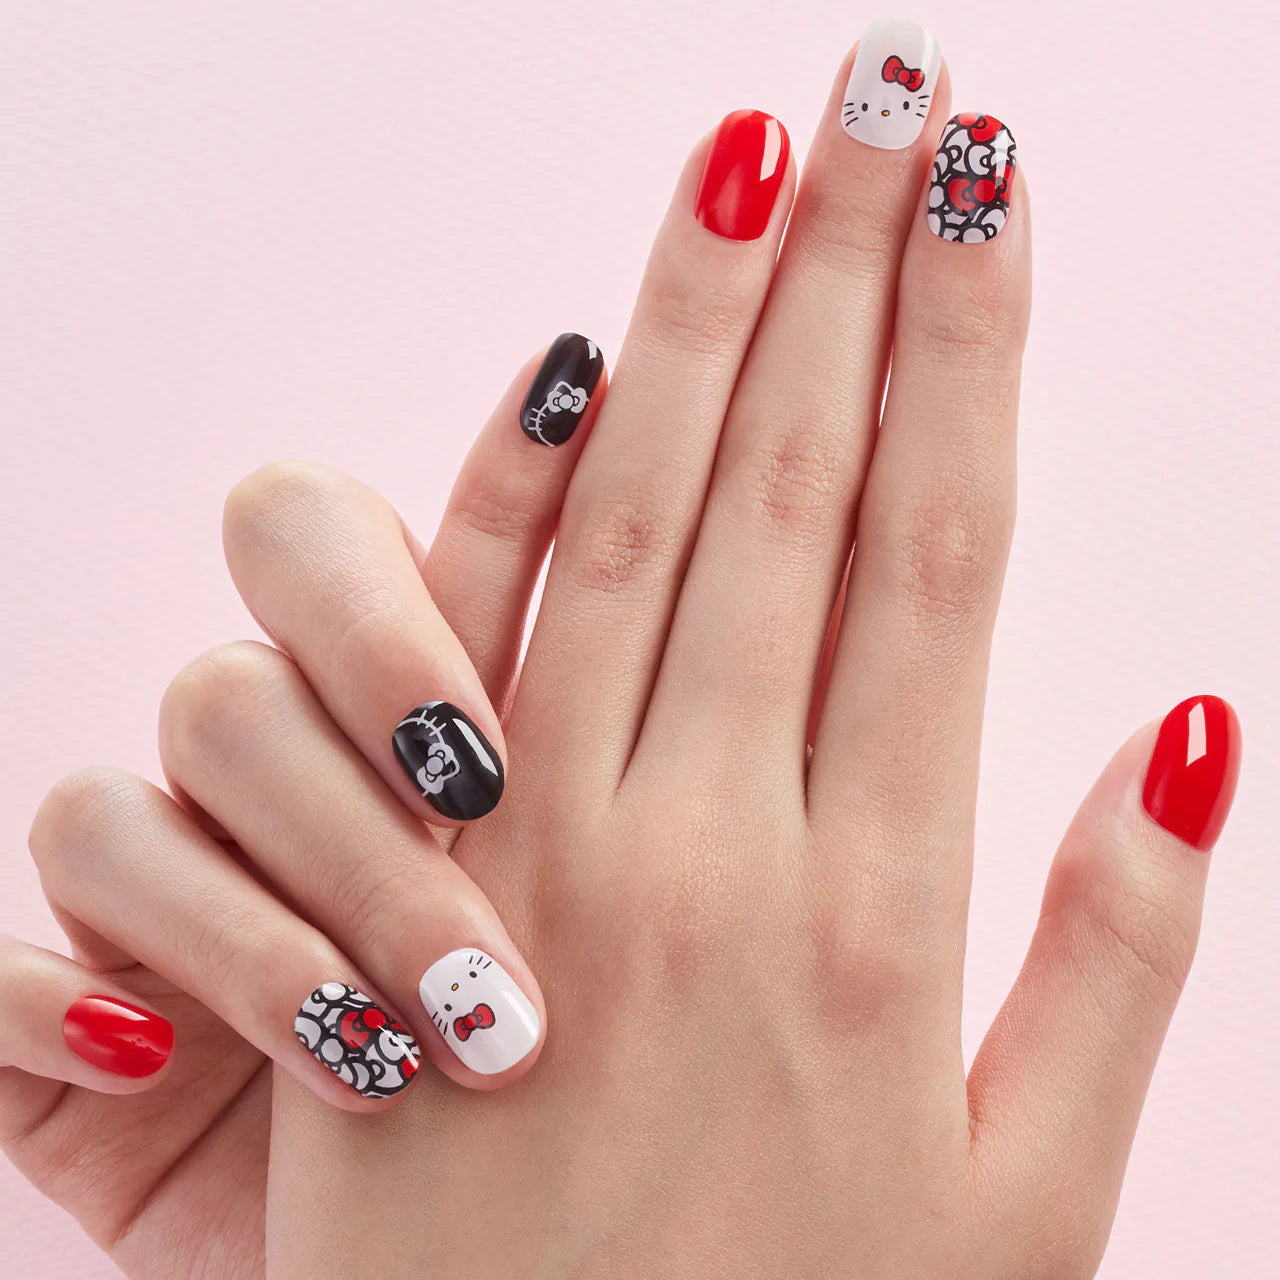 Summer nails 2023: The perfect manicure for your zodiac sign